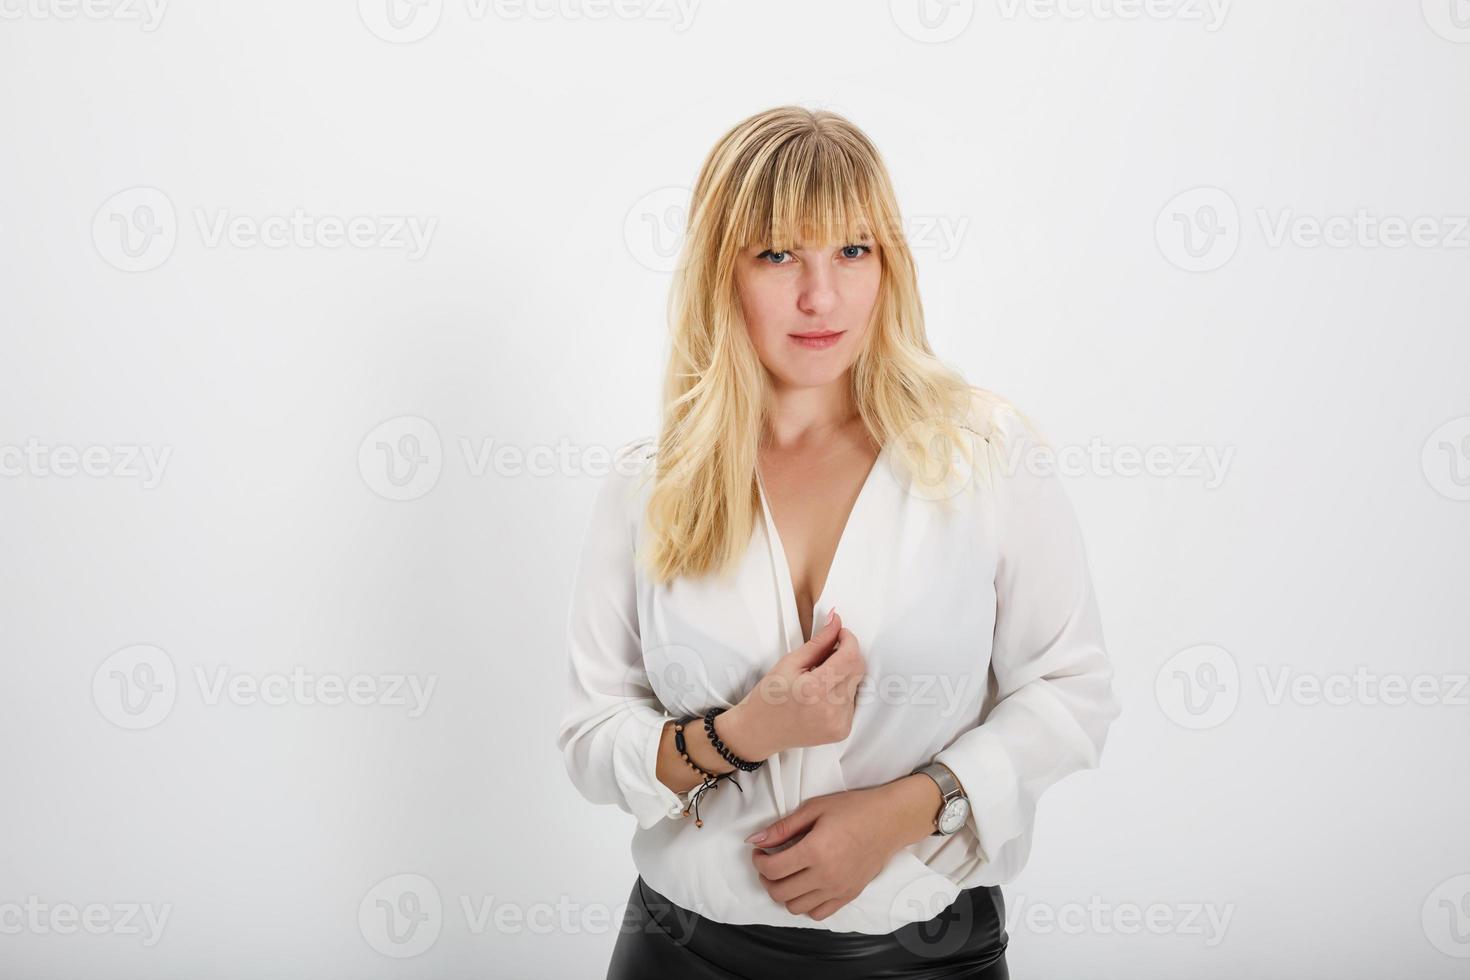 close up portrait of blonde girl model in white wool sweater on white background in studio photo